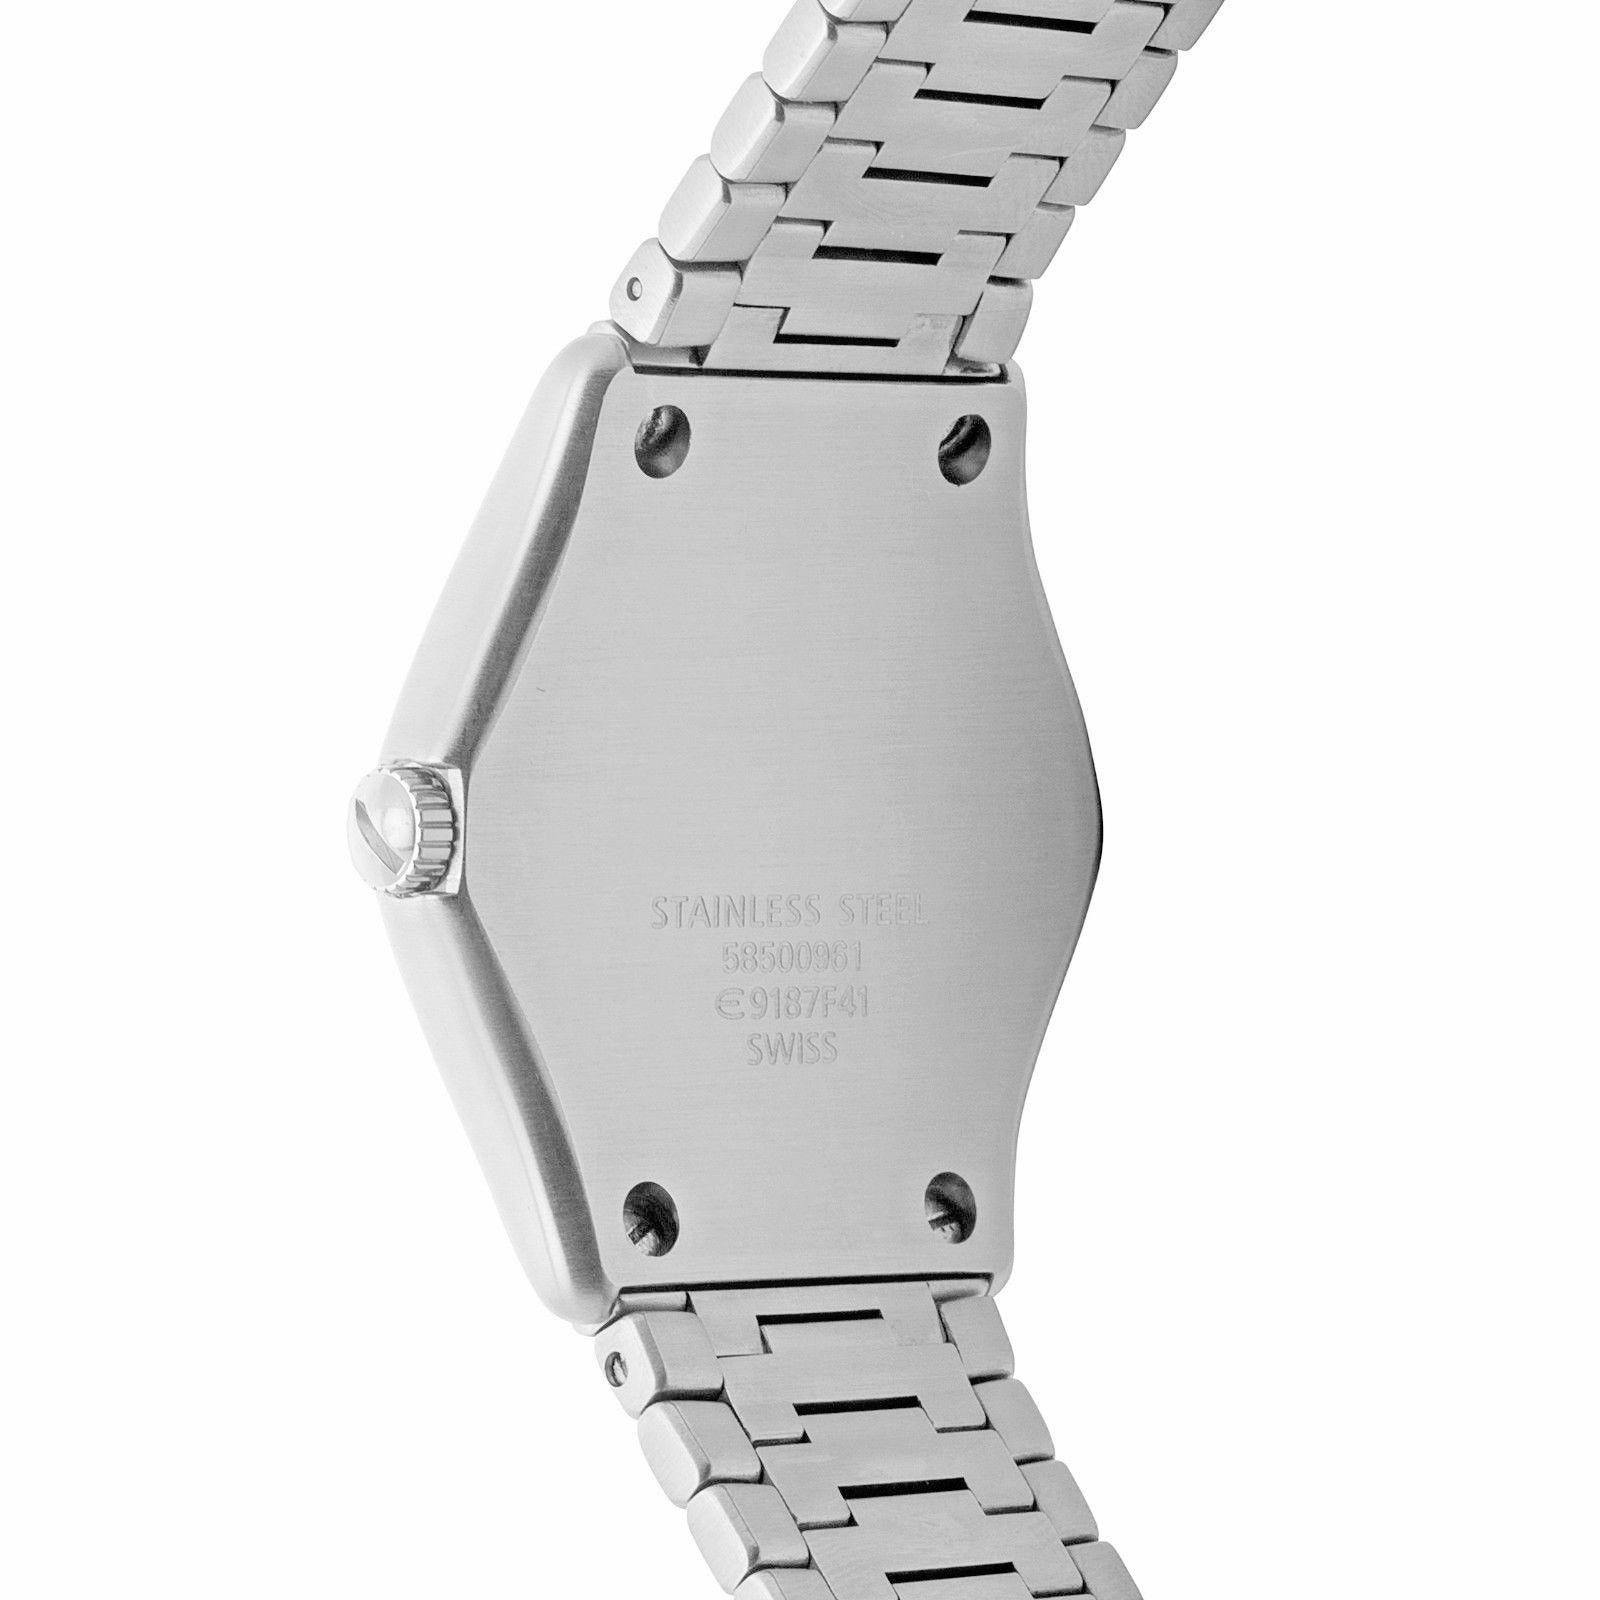 Ebel Wave Reference #:E9187F41.  EBEL CLASSIC WAVE E9187F41 QUARTZ SWISS MENS WATCH WHITE DIAL STAINLESS STEEL. Verified and Certified by WatchFacts. 1 year warranty offered by WatchFacts.